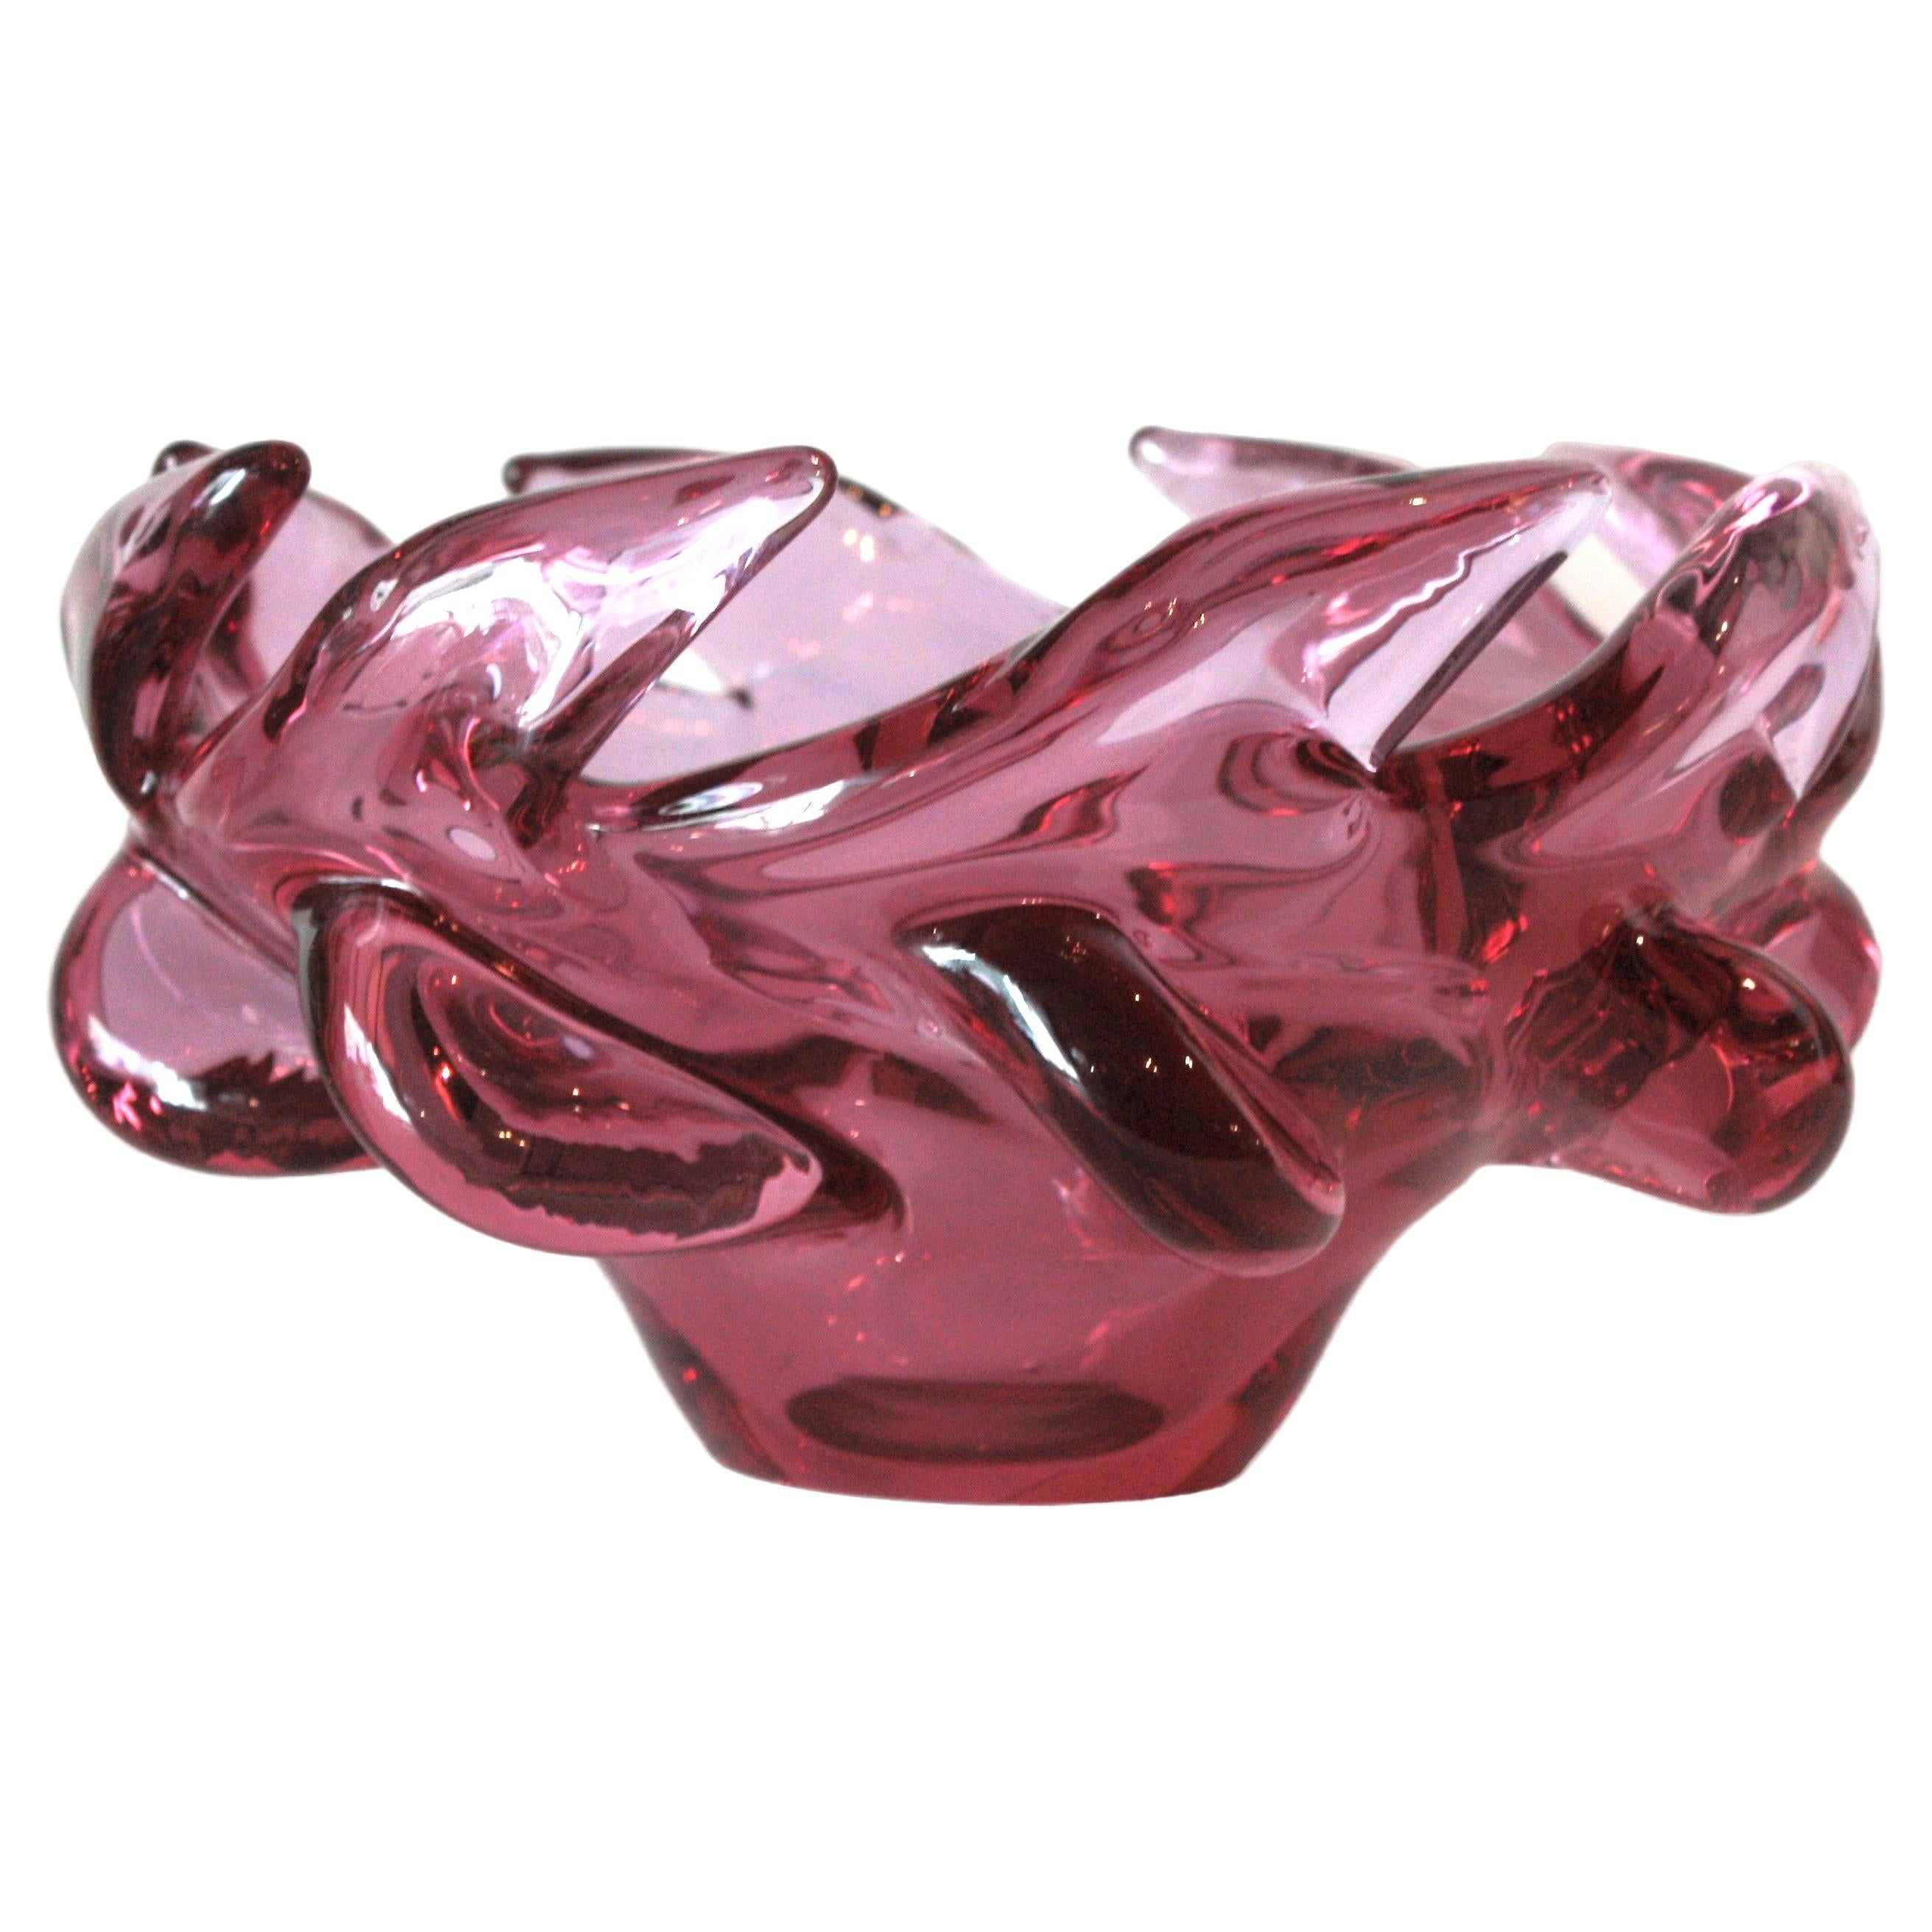 Large hand blown pink Murano glass flower centerpiece bowl. Attributed to Archimede Seguso, Italy, 1950s.
This eye-catching bowl is made of hand blown pink purple glass with scalloped twisting rim and pulled details.
Lovely to be used as